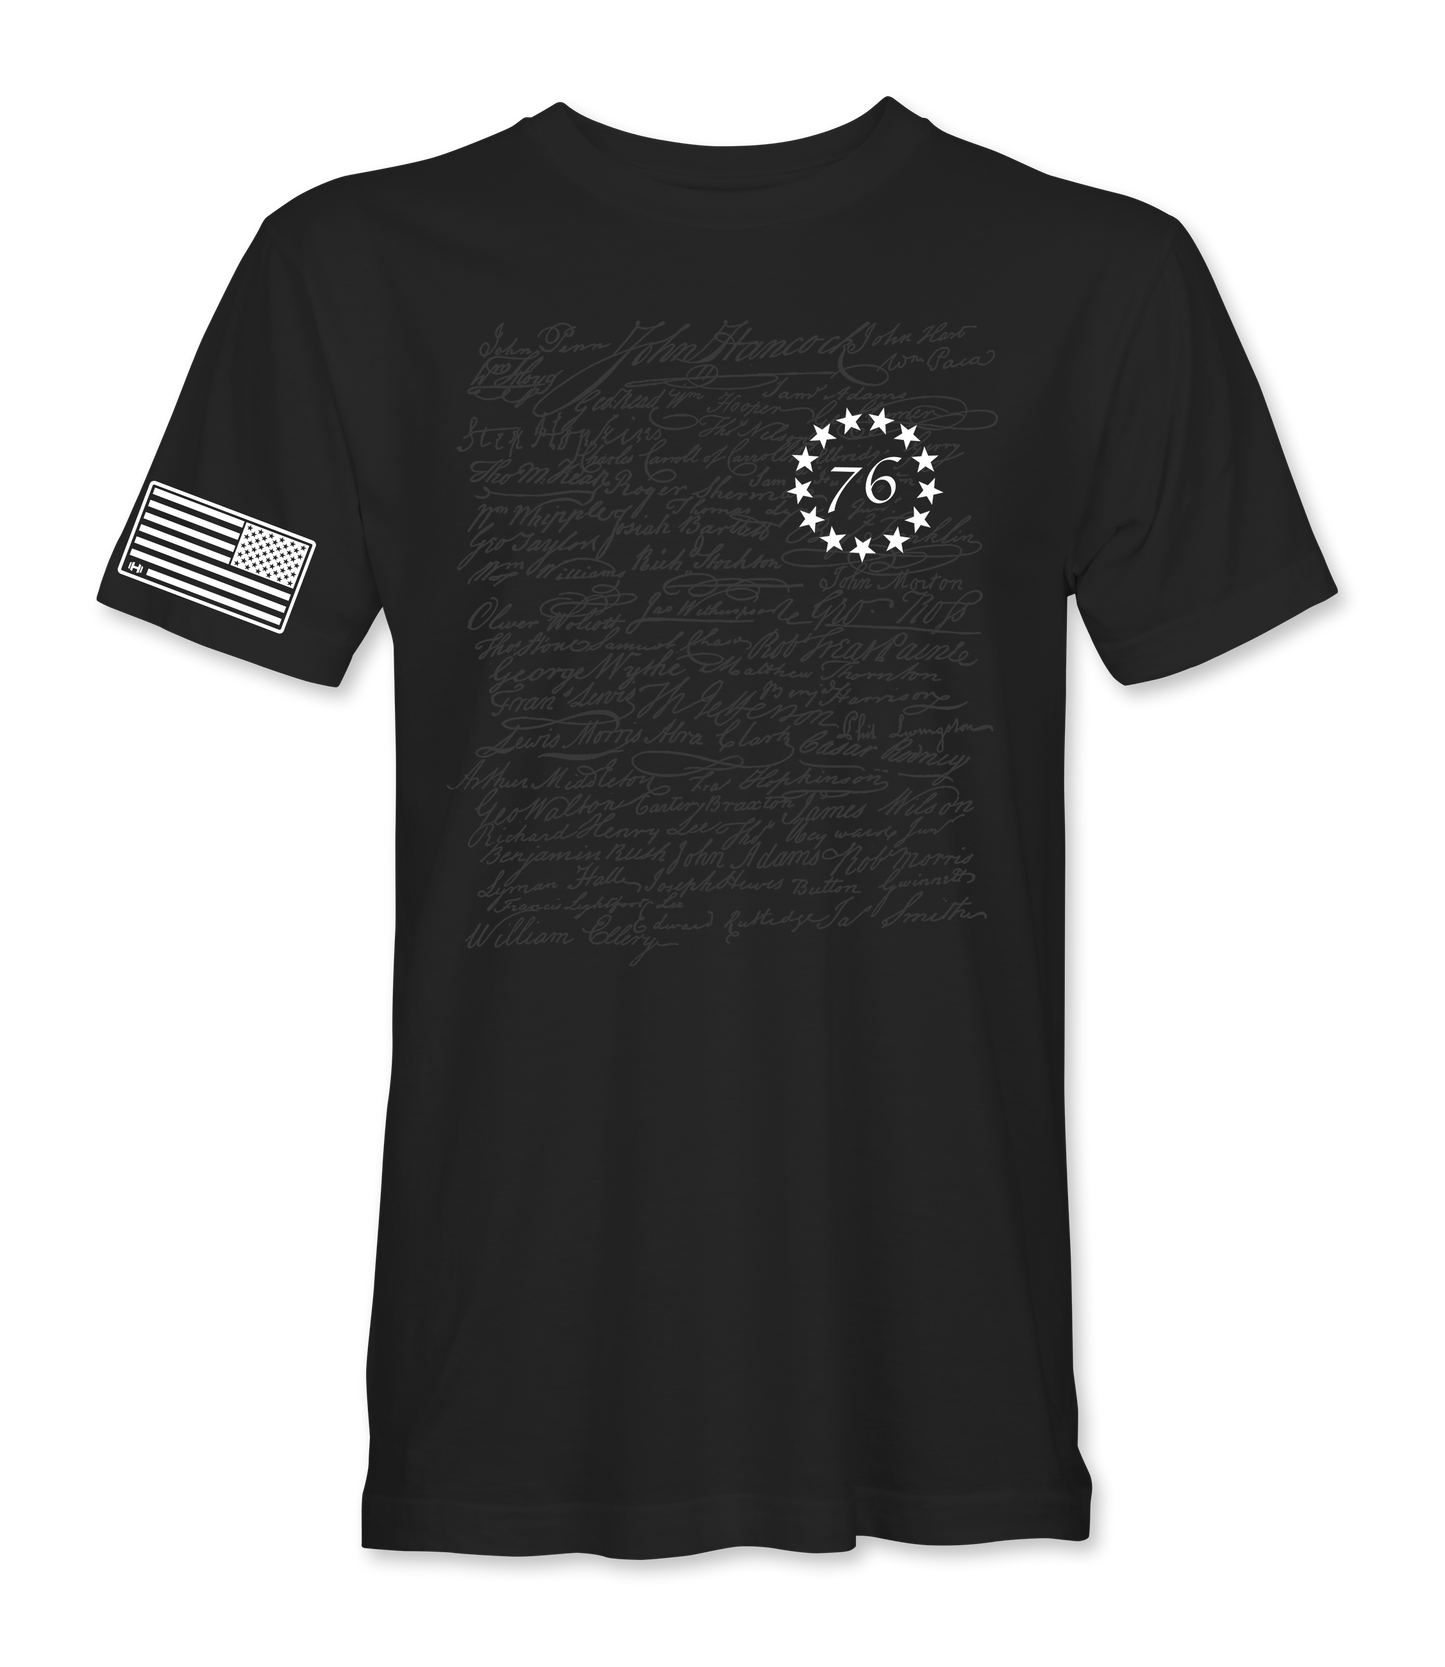 Declaration of Independence T-shirt – officialhodgetwins